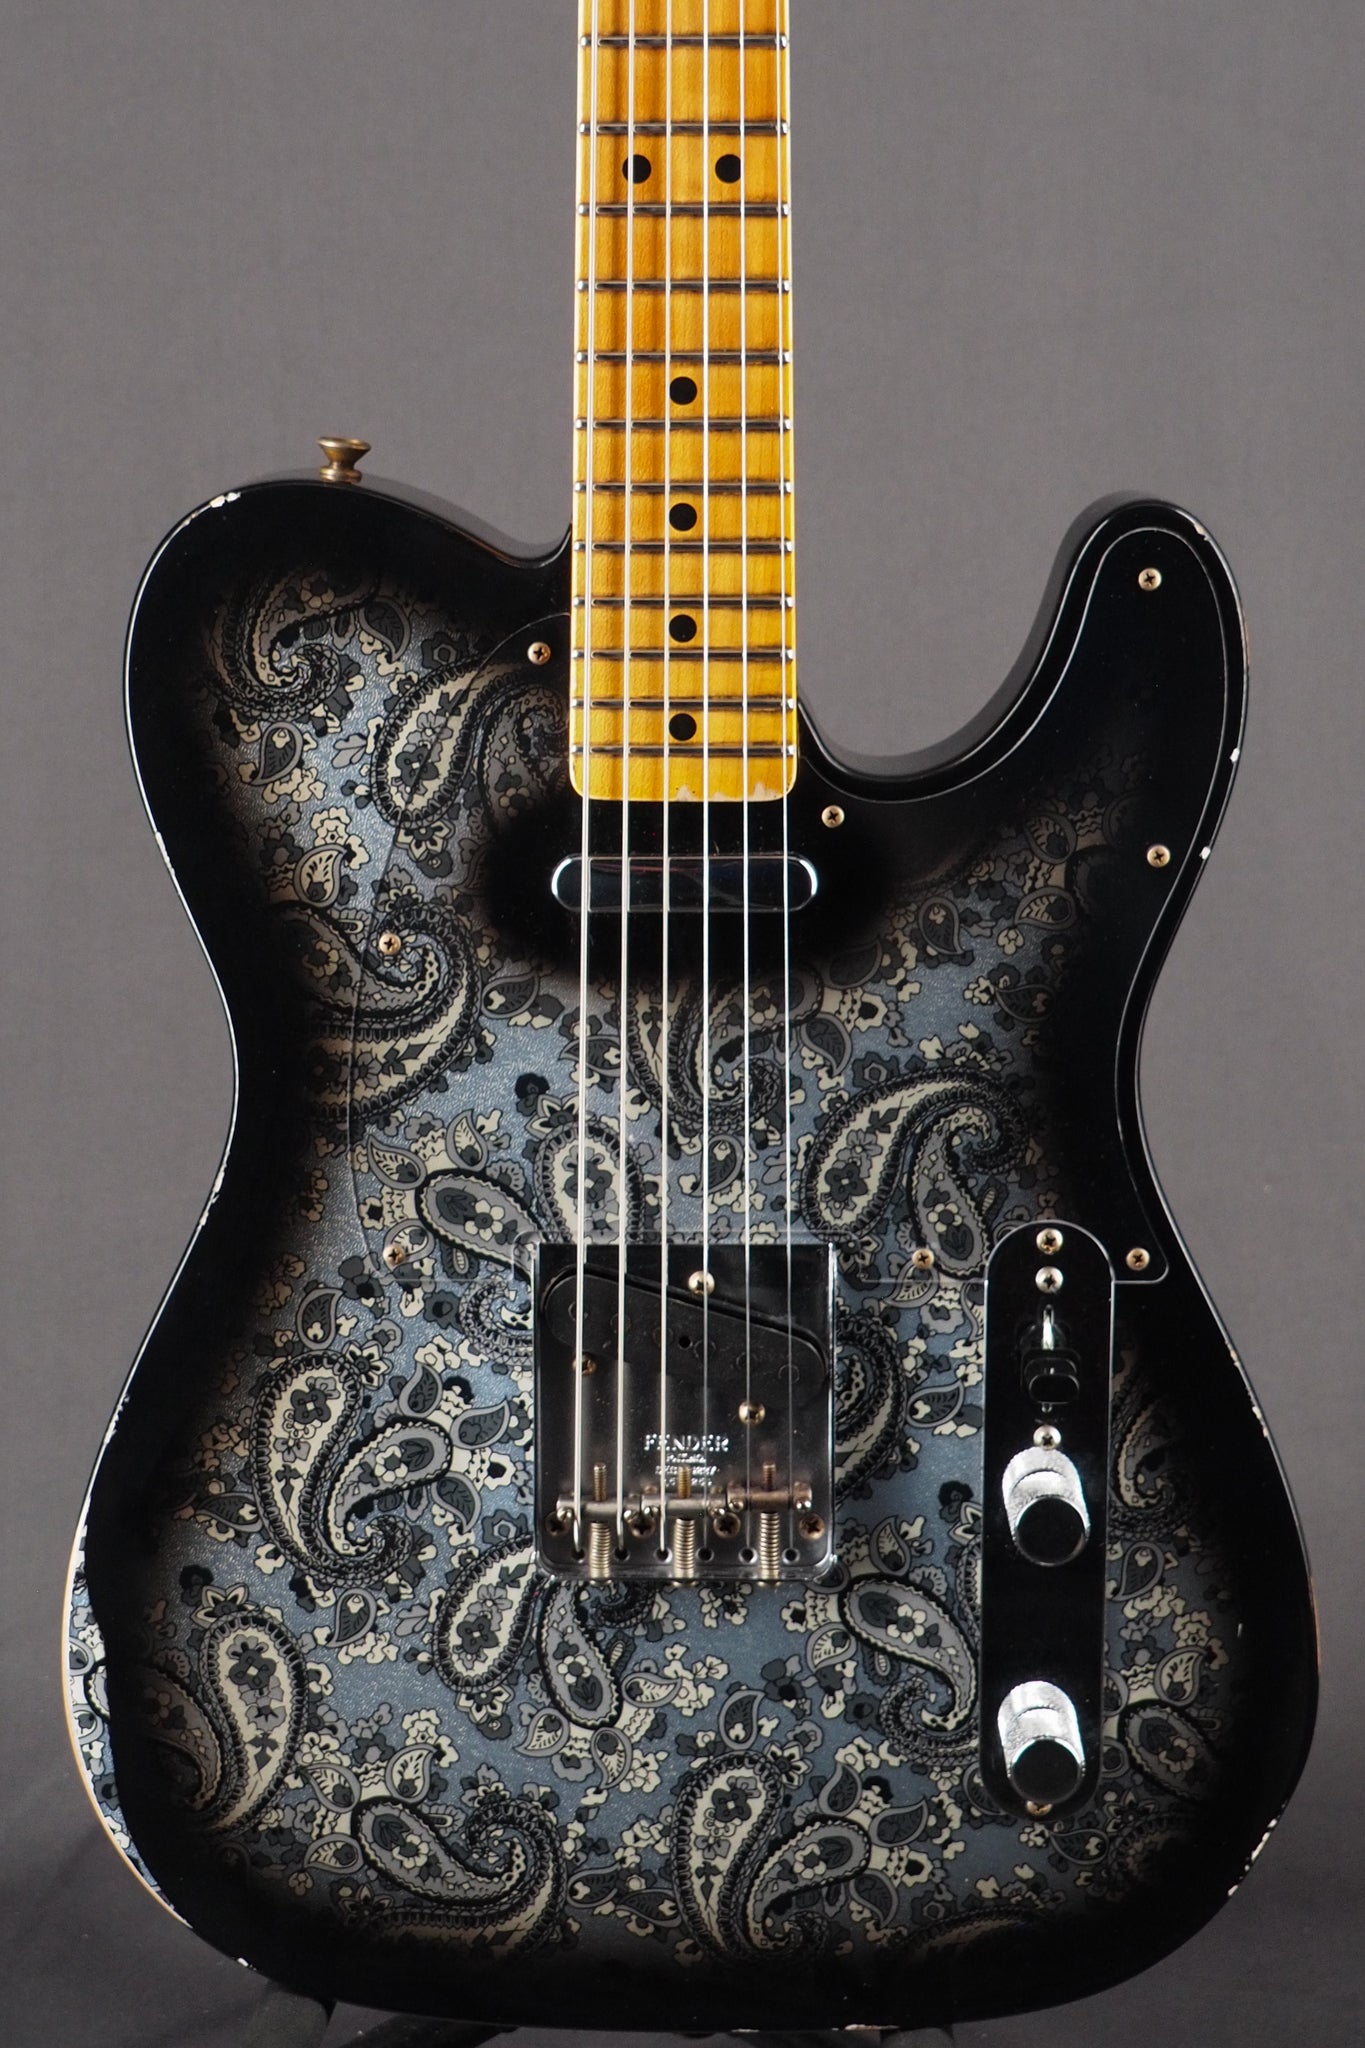 '68 Limited-Edition Black Paisley Telecaster Relic